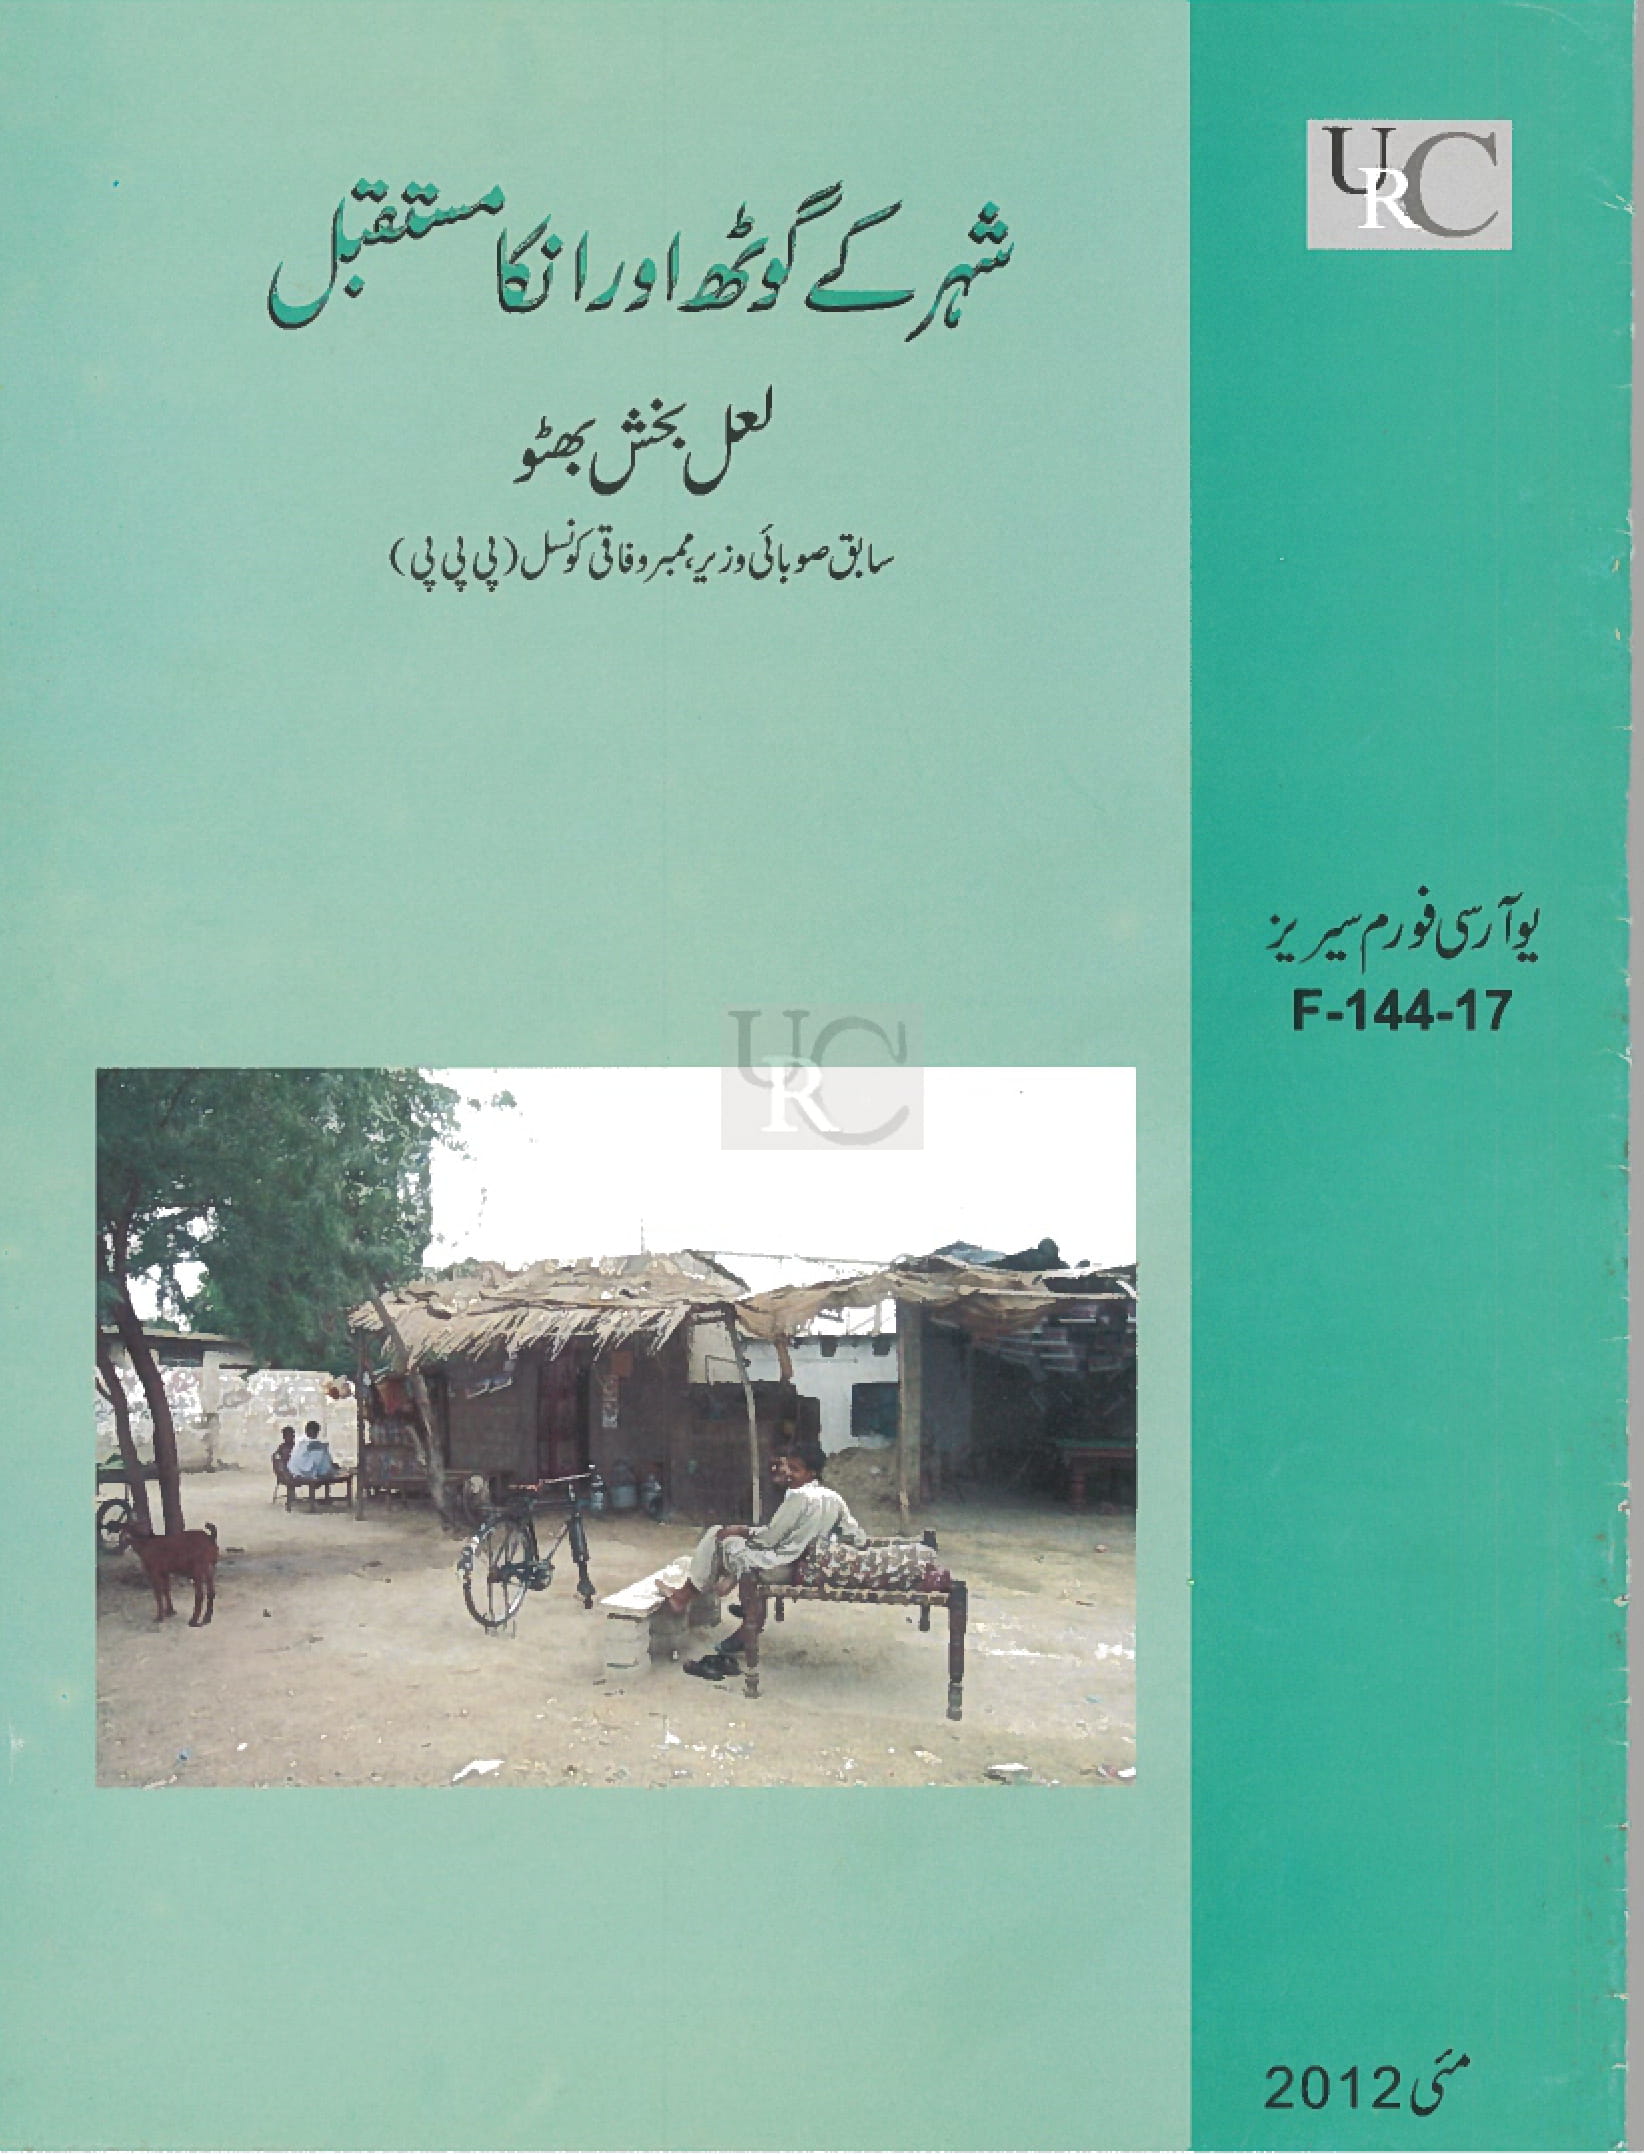 Goths (Villages) and its future, Forum by Laal Bux Bhutto, 15th Feb 2012